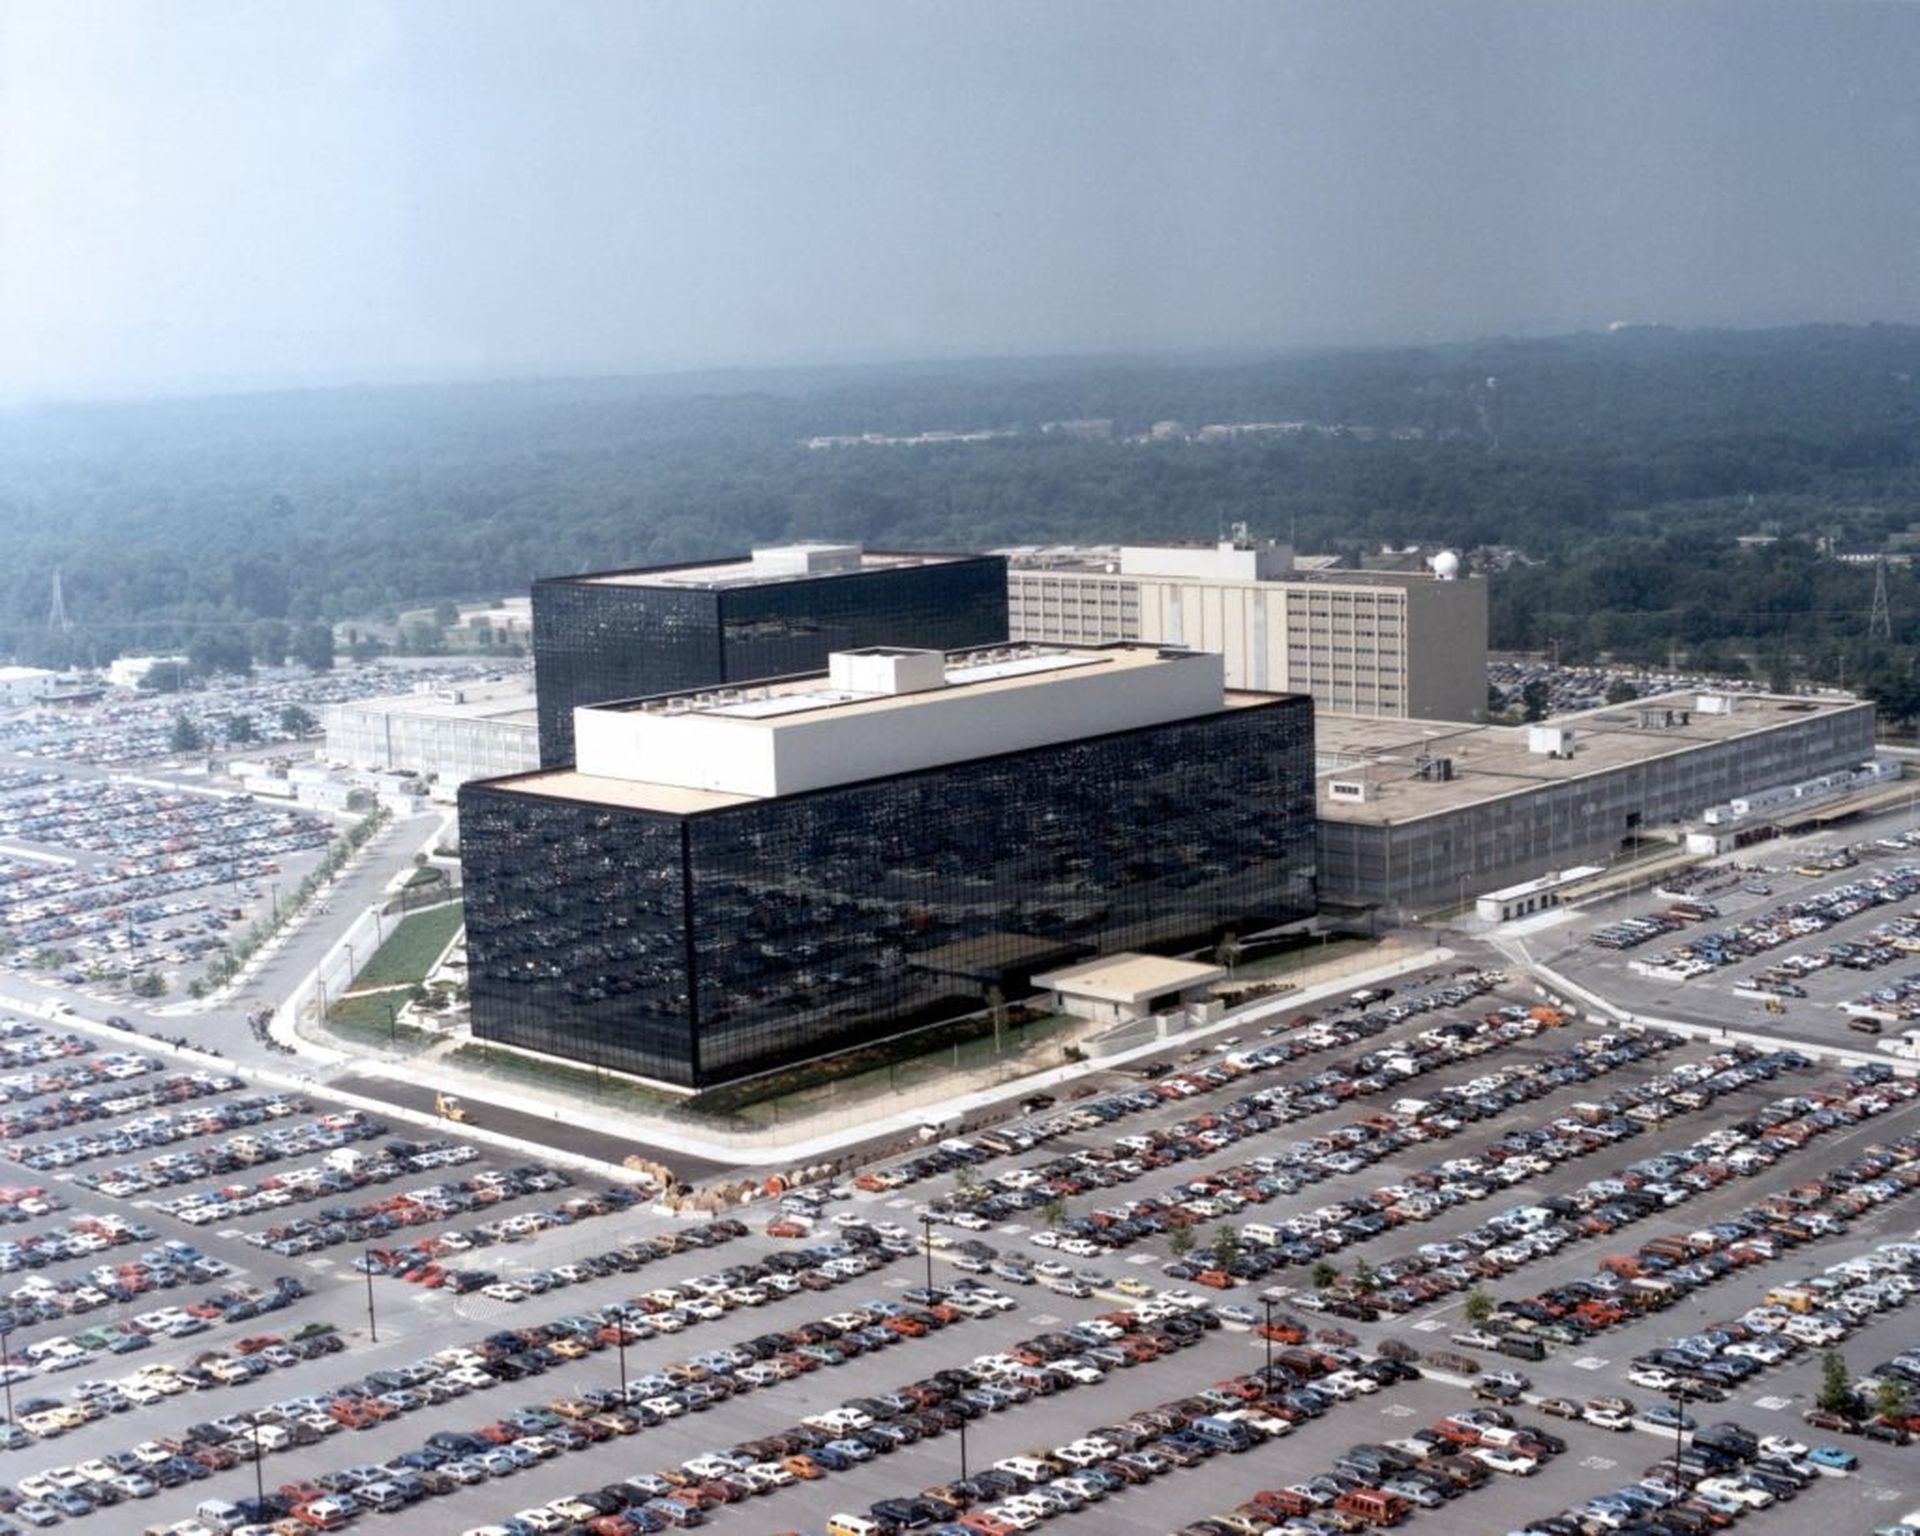 The National Security Agency (NSA) headquarters is seen in Fort Meade, Md. The Department of Justice has arrested a former NSA employee, charging him with attempting to sell classified government secrets, including sensitive information related to U.S. national security and cybersecurity, to an undercover FBI operative he believed was working for a...